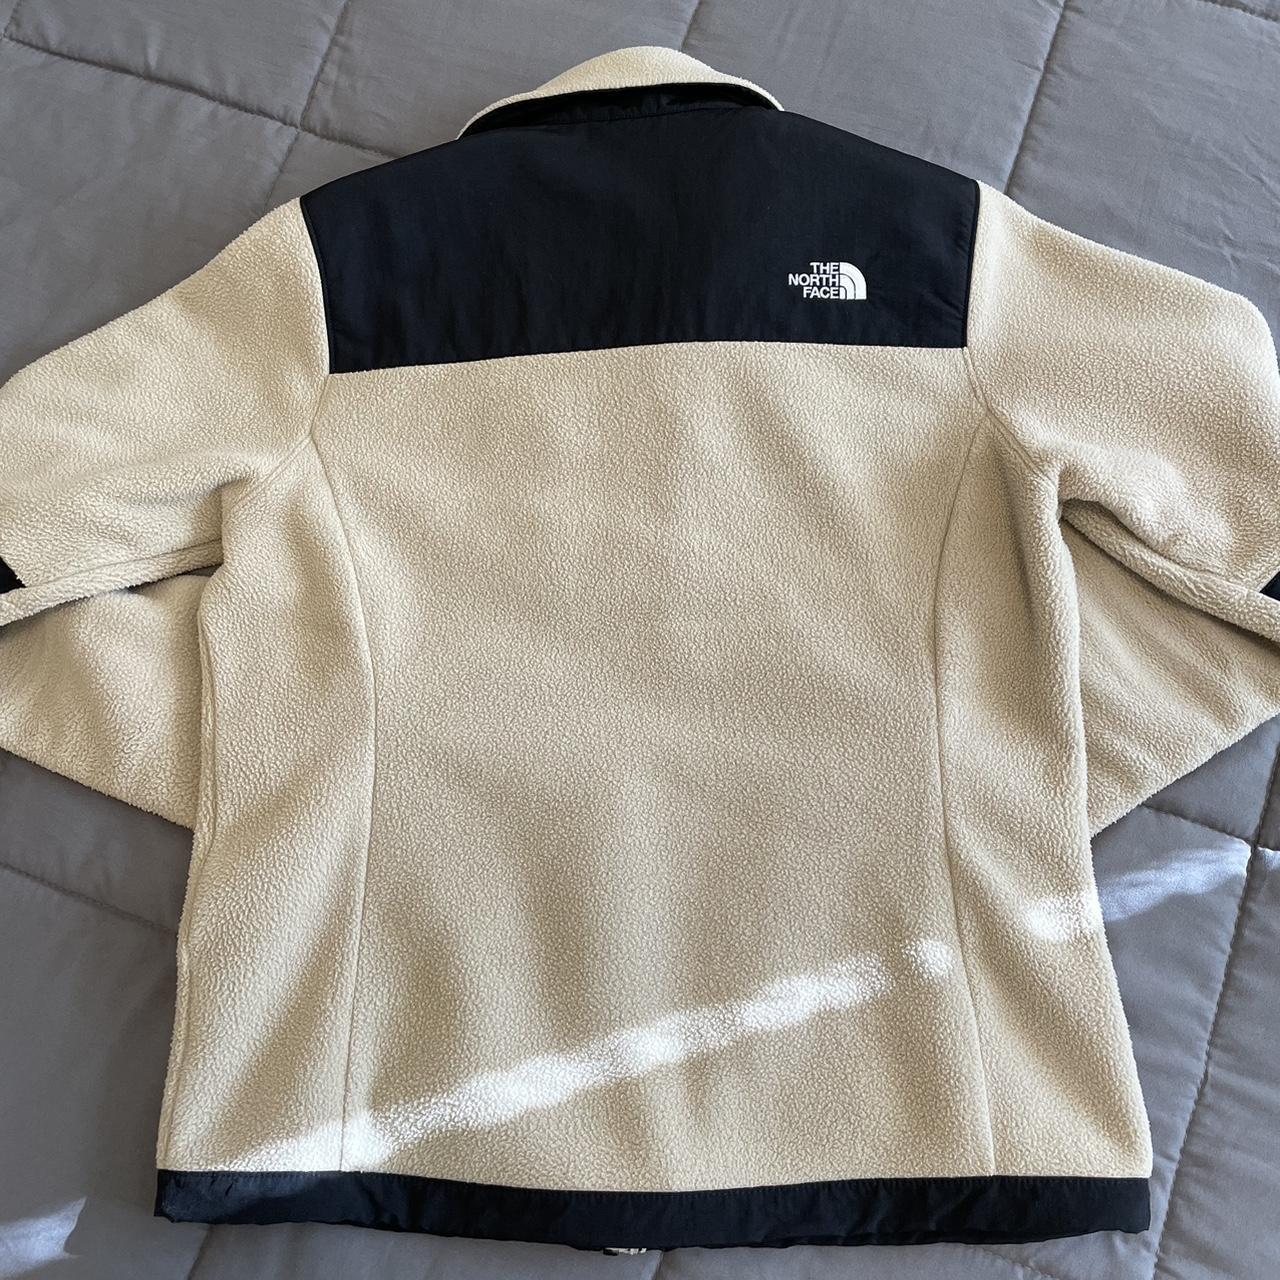 The North Face Women's Cream and Black Jacket (2)